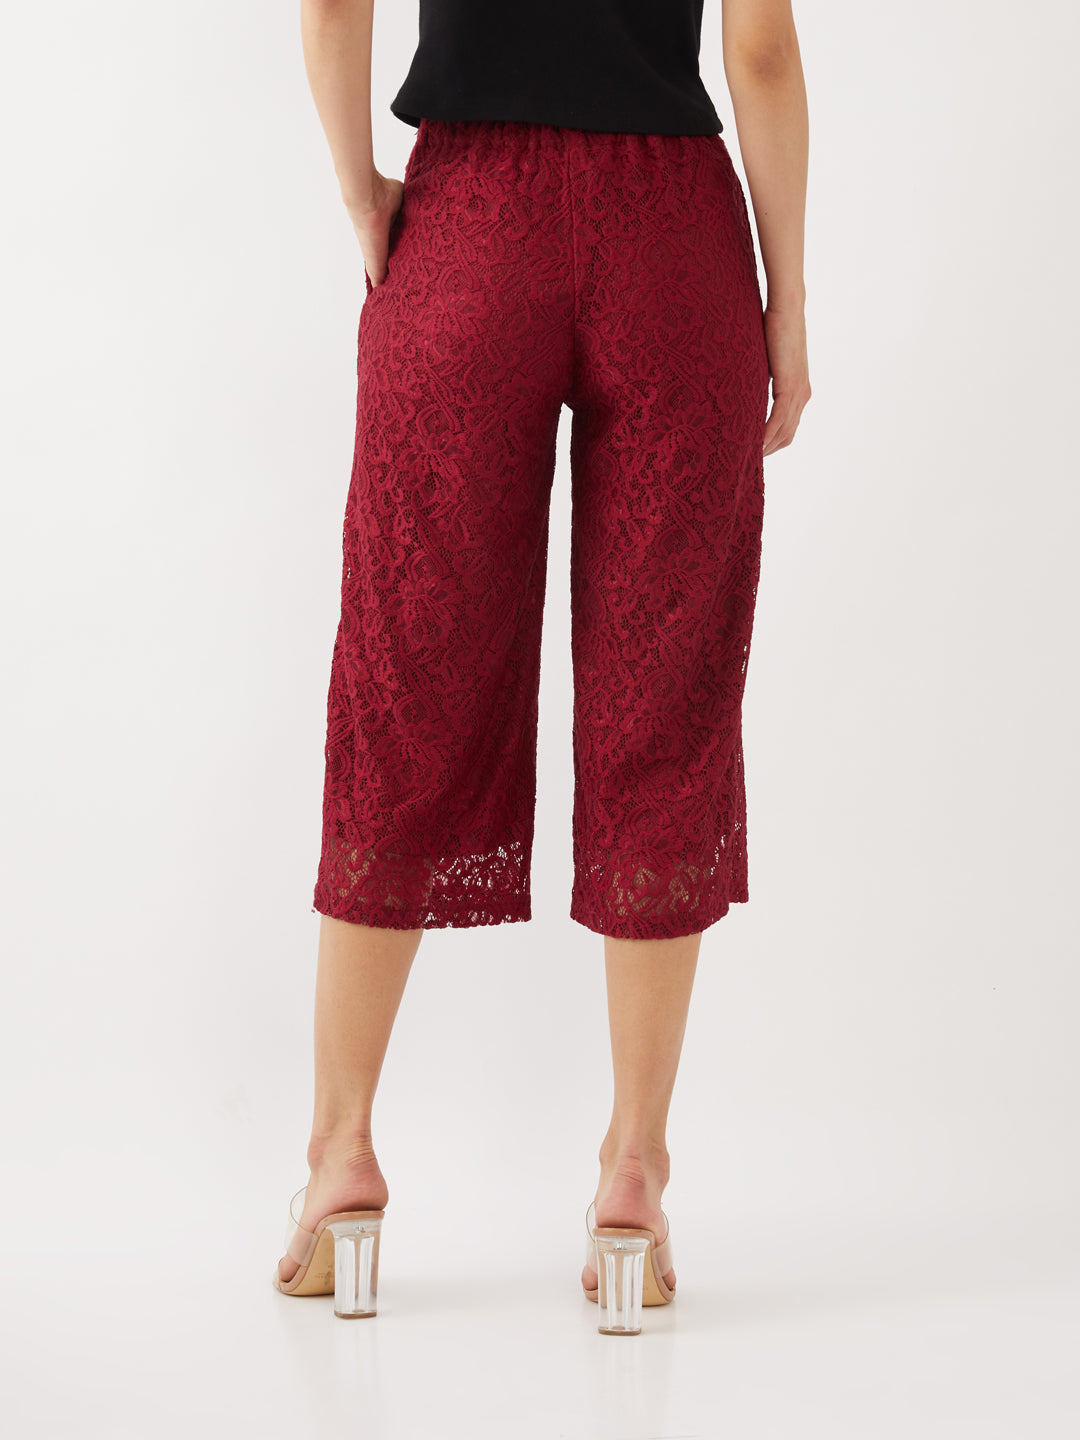 Maroon Lace Culottes For Women